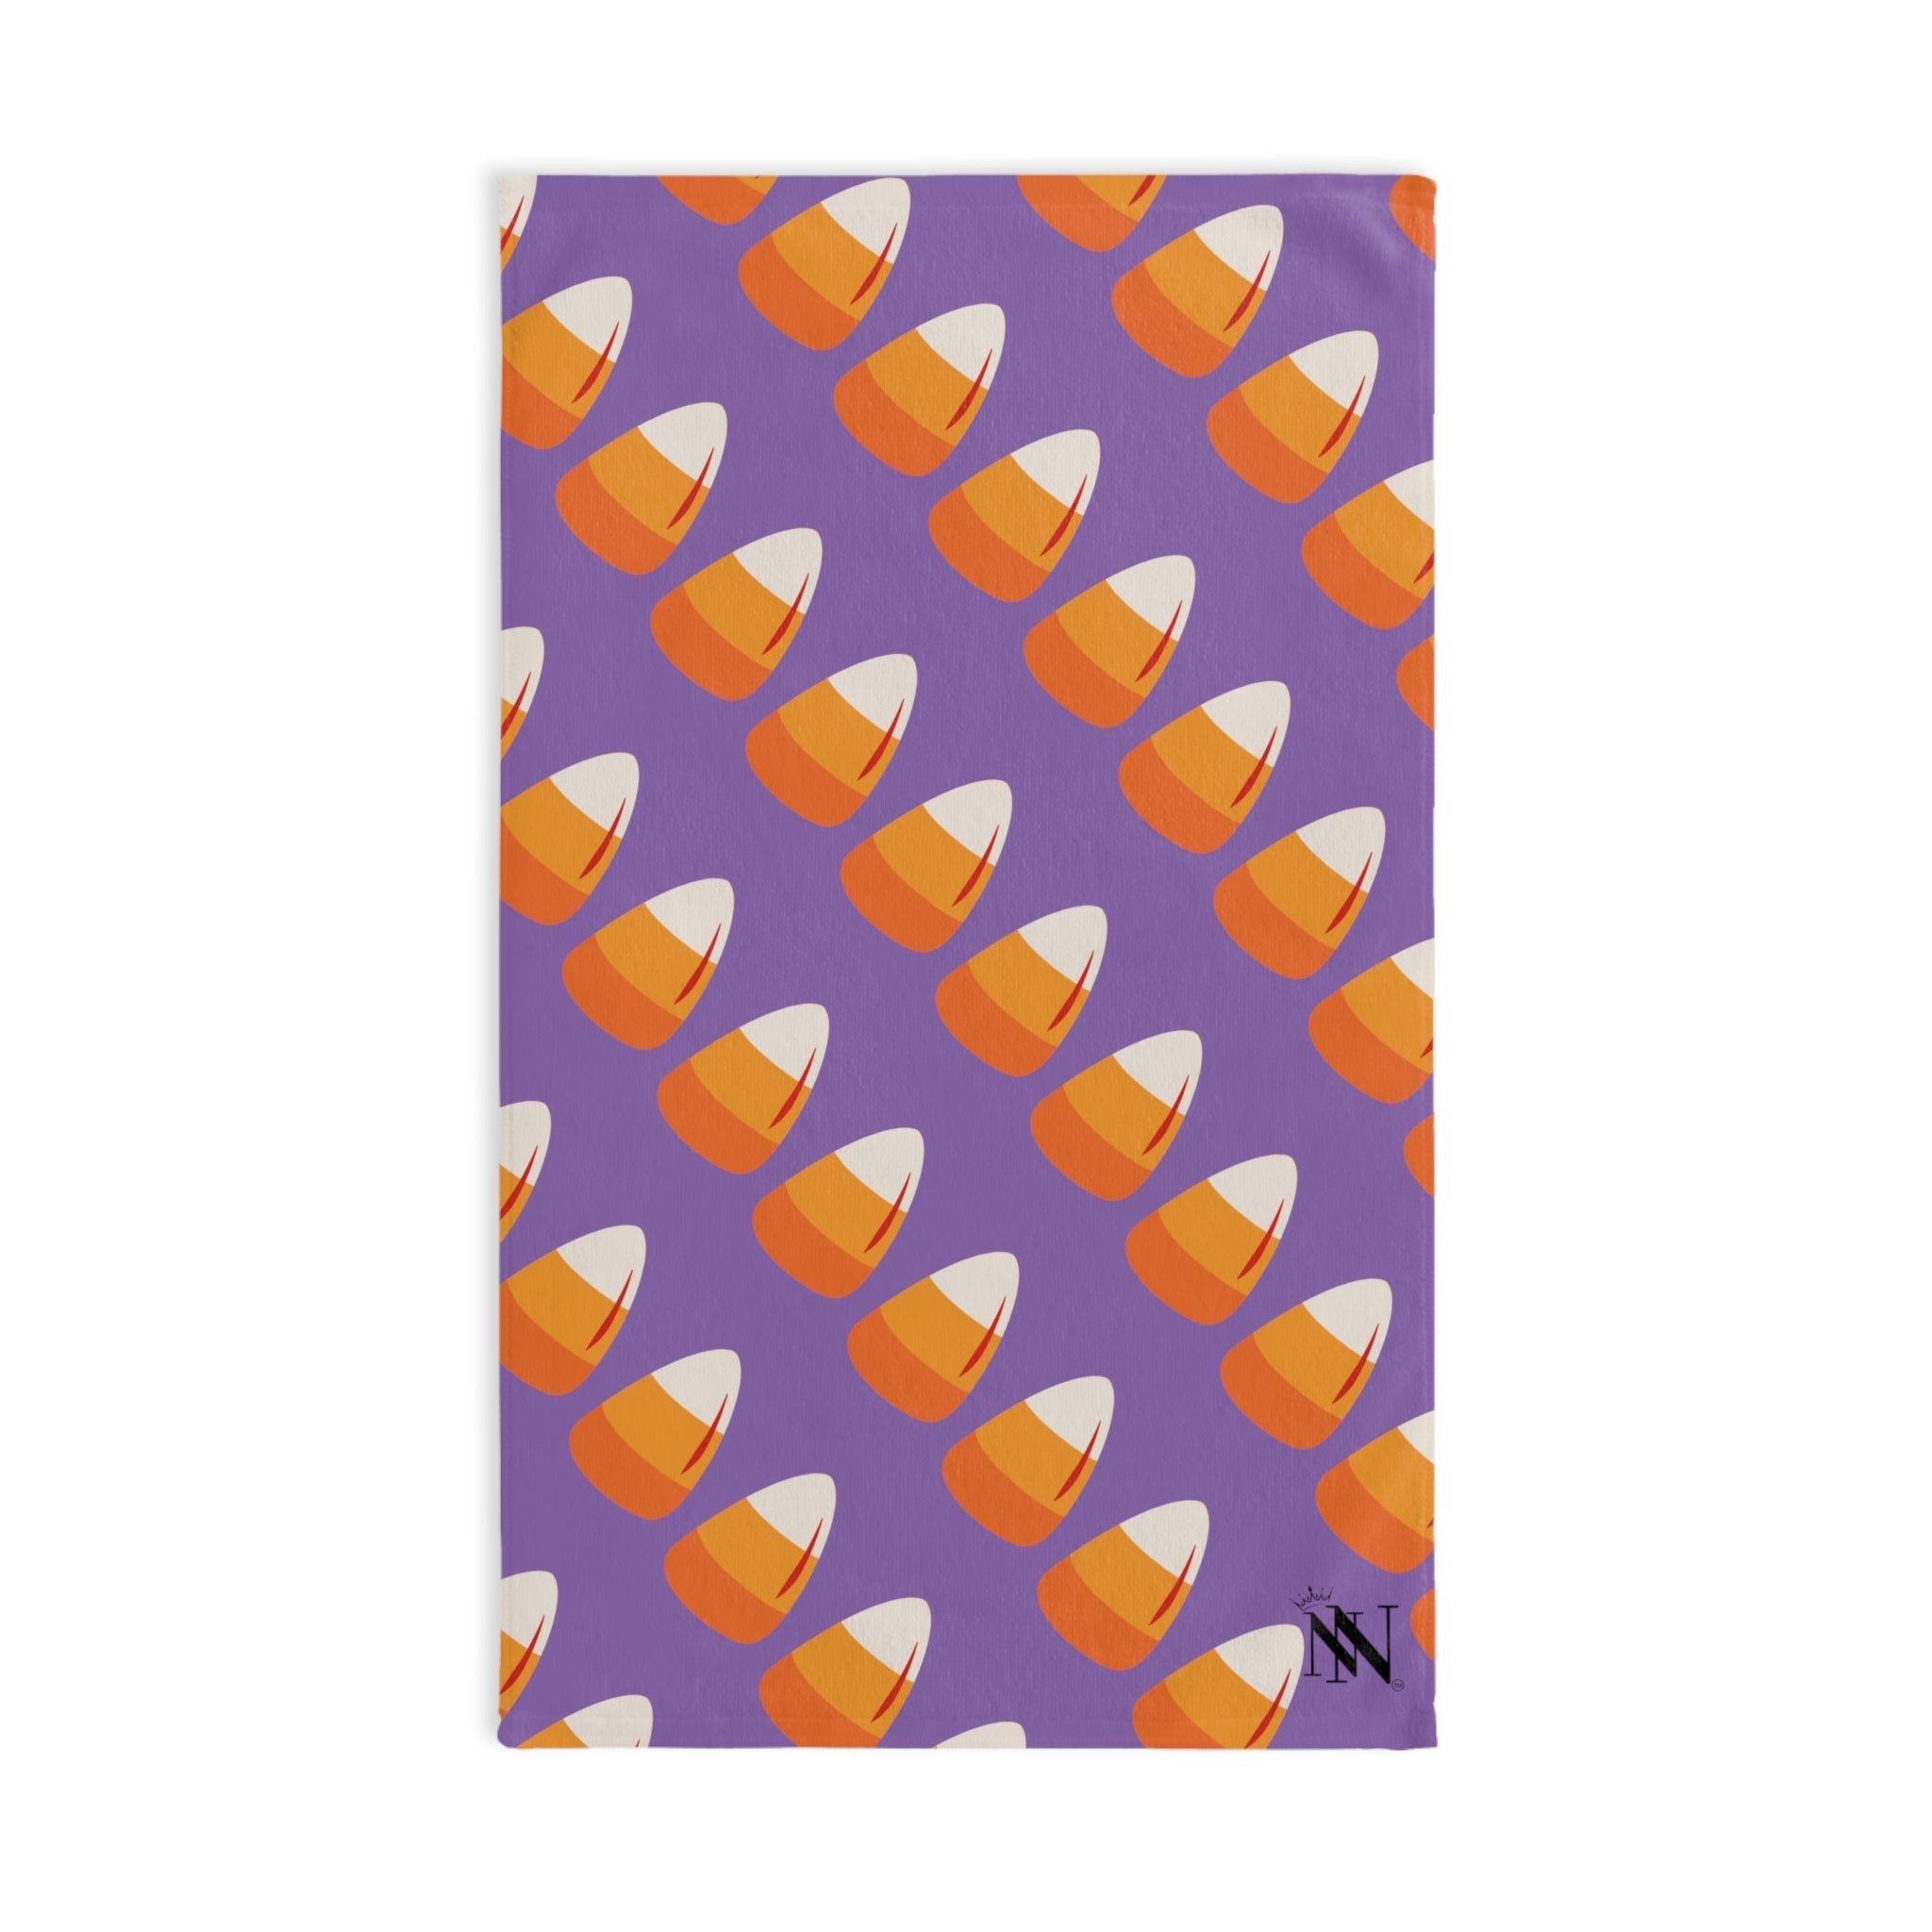 Candy Corn Lavendar | Funny Gifts for Men - Gifts for Him - Birthday Gifts for Men, Him, Husband, Boyfriend, New Couple Gifts, Fathers & Valentines Day Gifts, Hand Towels NECTAR NAPKINS